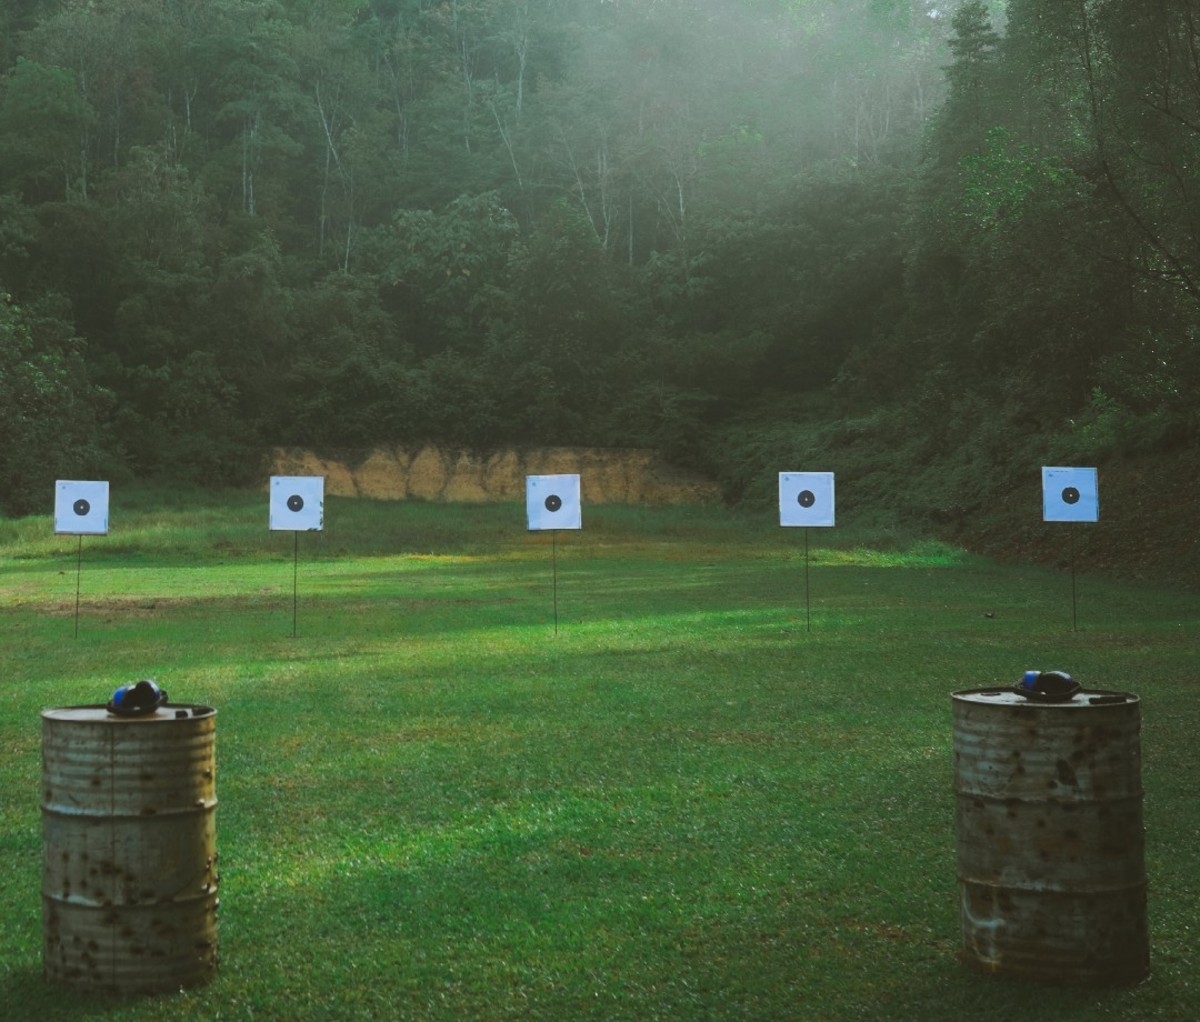 Outdoor lawn with a set of targets.